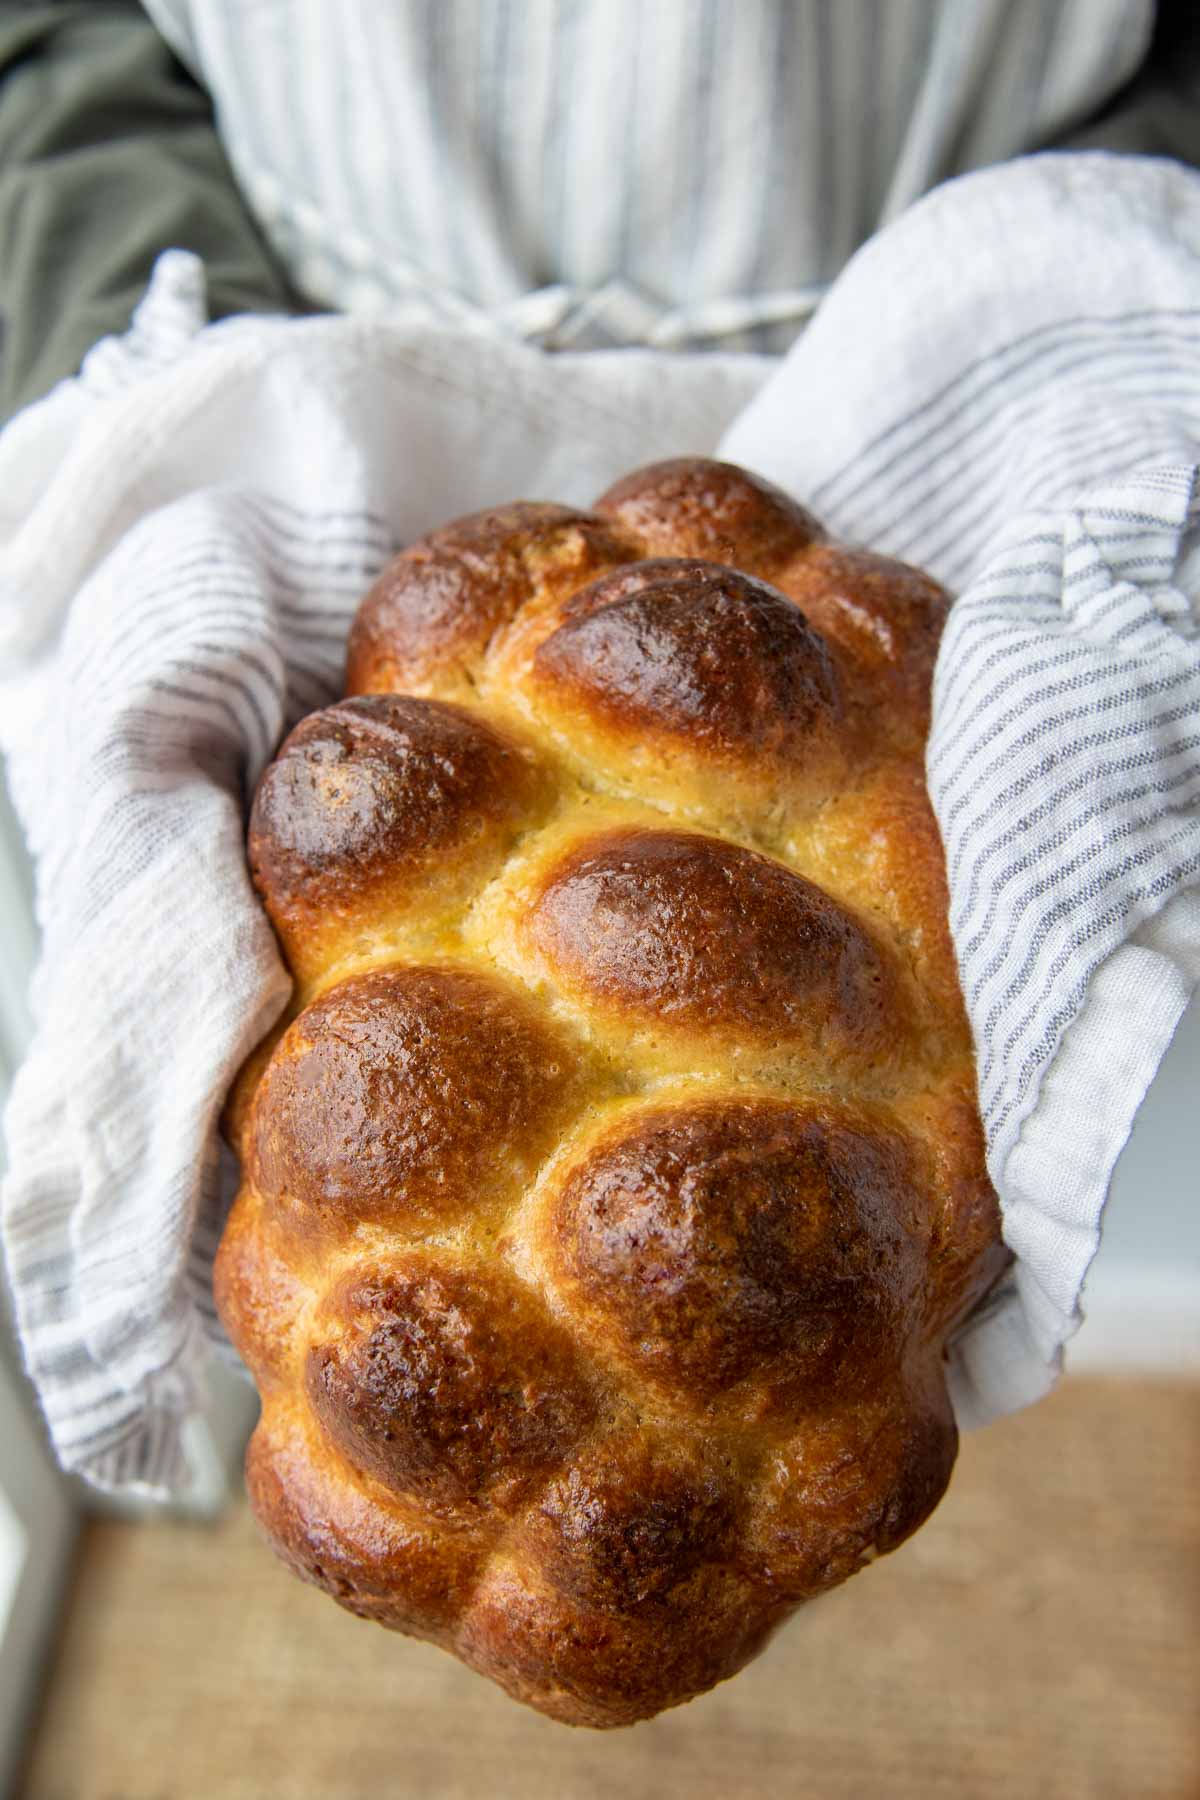 a uncut loaf of gluten free challah bread being held up by someone wearing an apron.